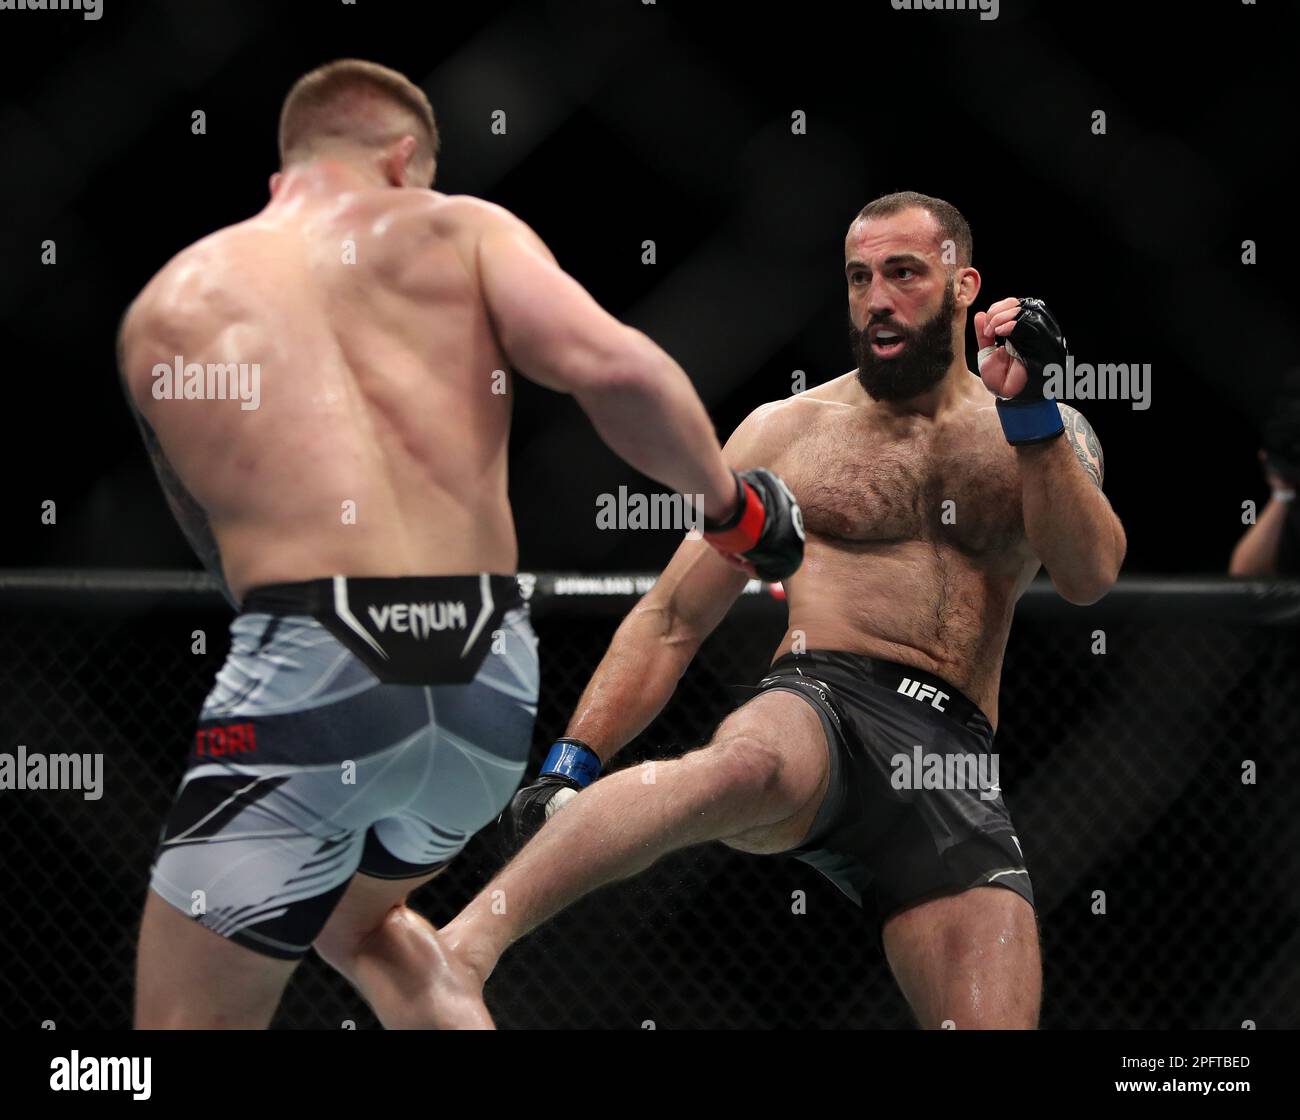 Roman Dolidze (right) in action against Marvin Vettori in their middleweight bout during UFC 286 at O2 Arena, London Picture date Saturday March 18, 2023 Stock Photo